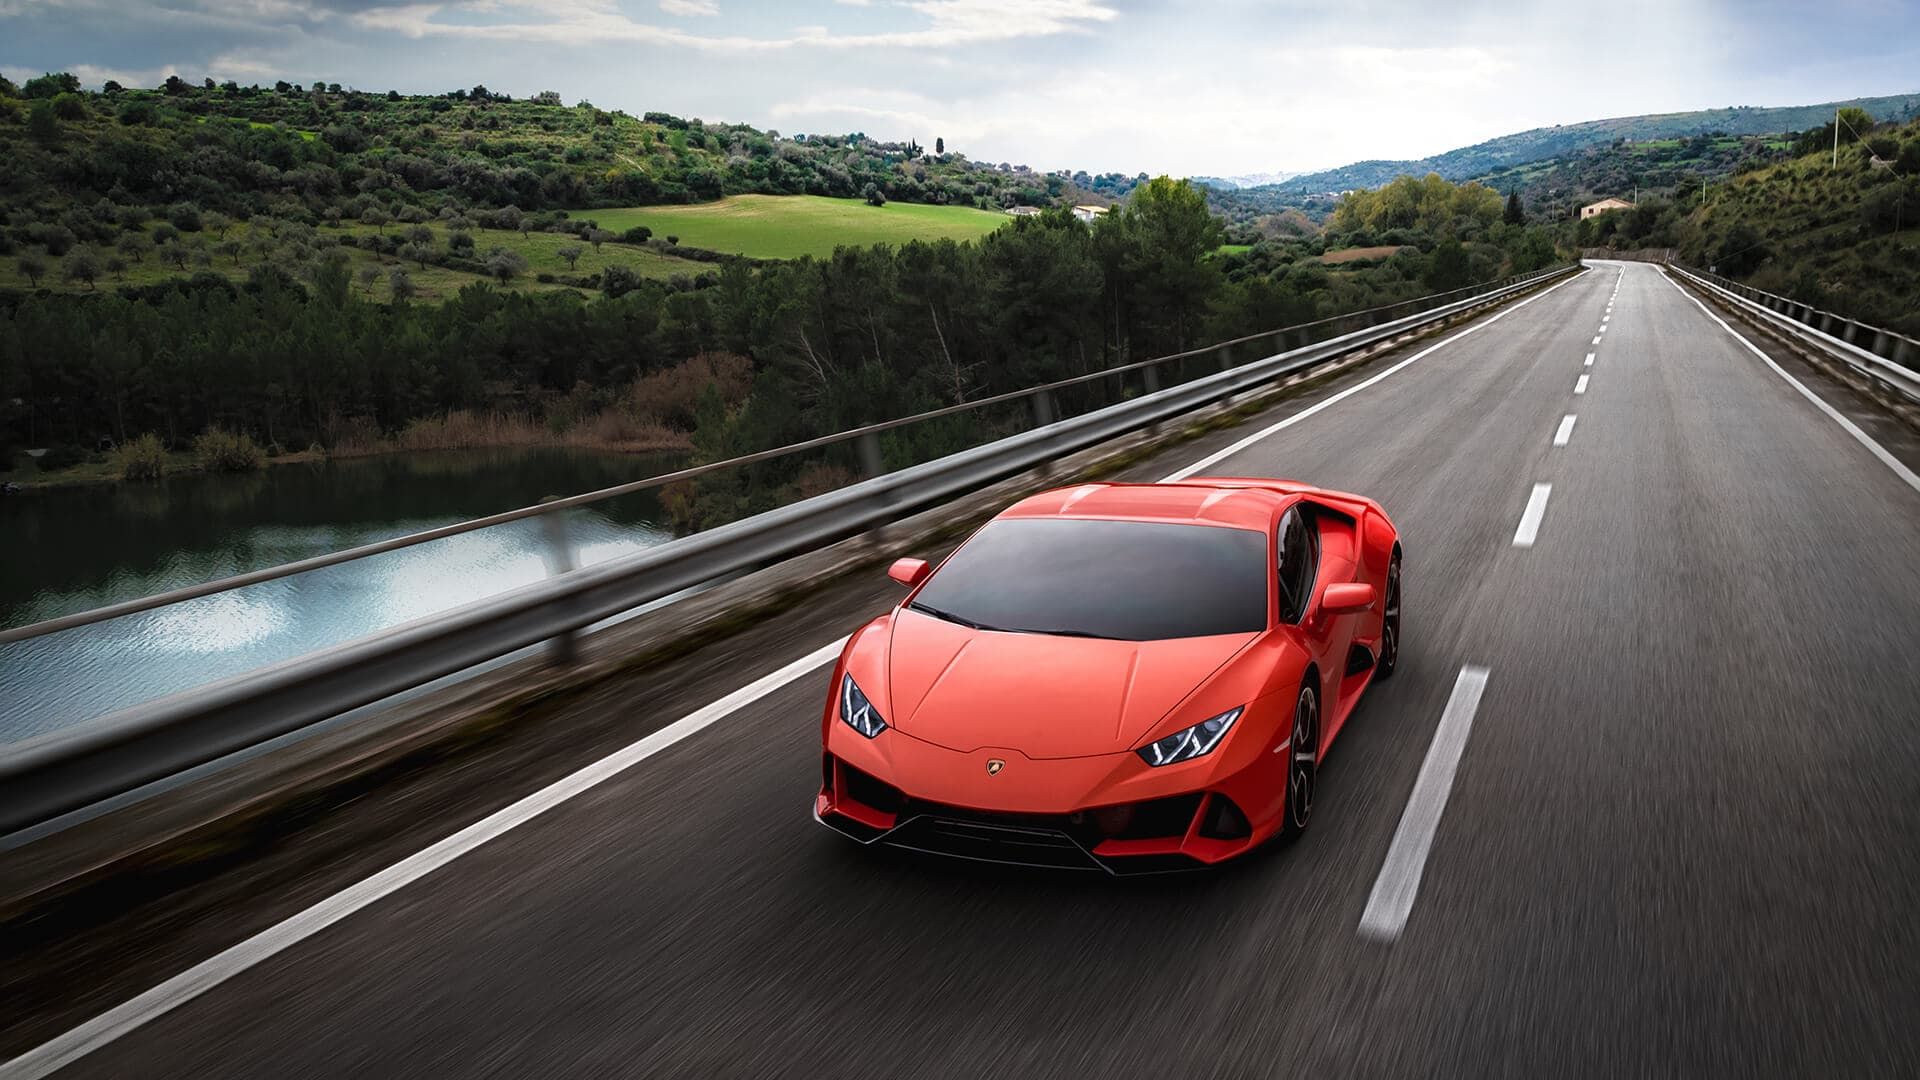 2020 6 Must-Know Facts About the 2019 Lamborghini Huracan EVO